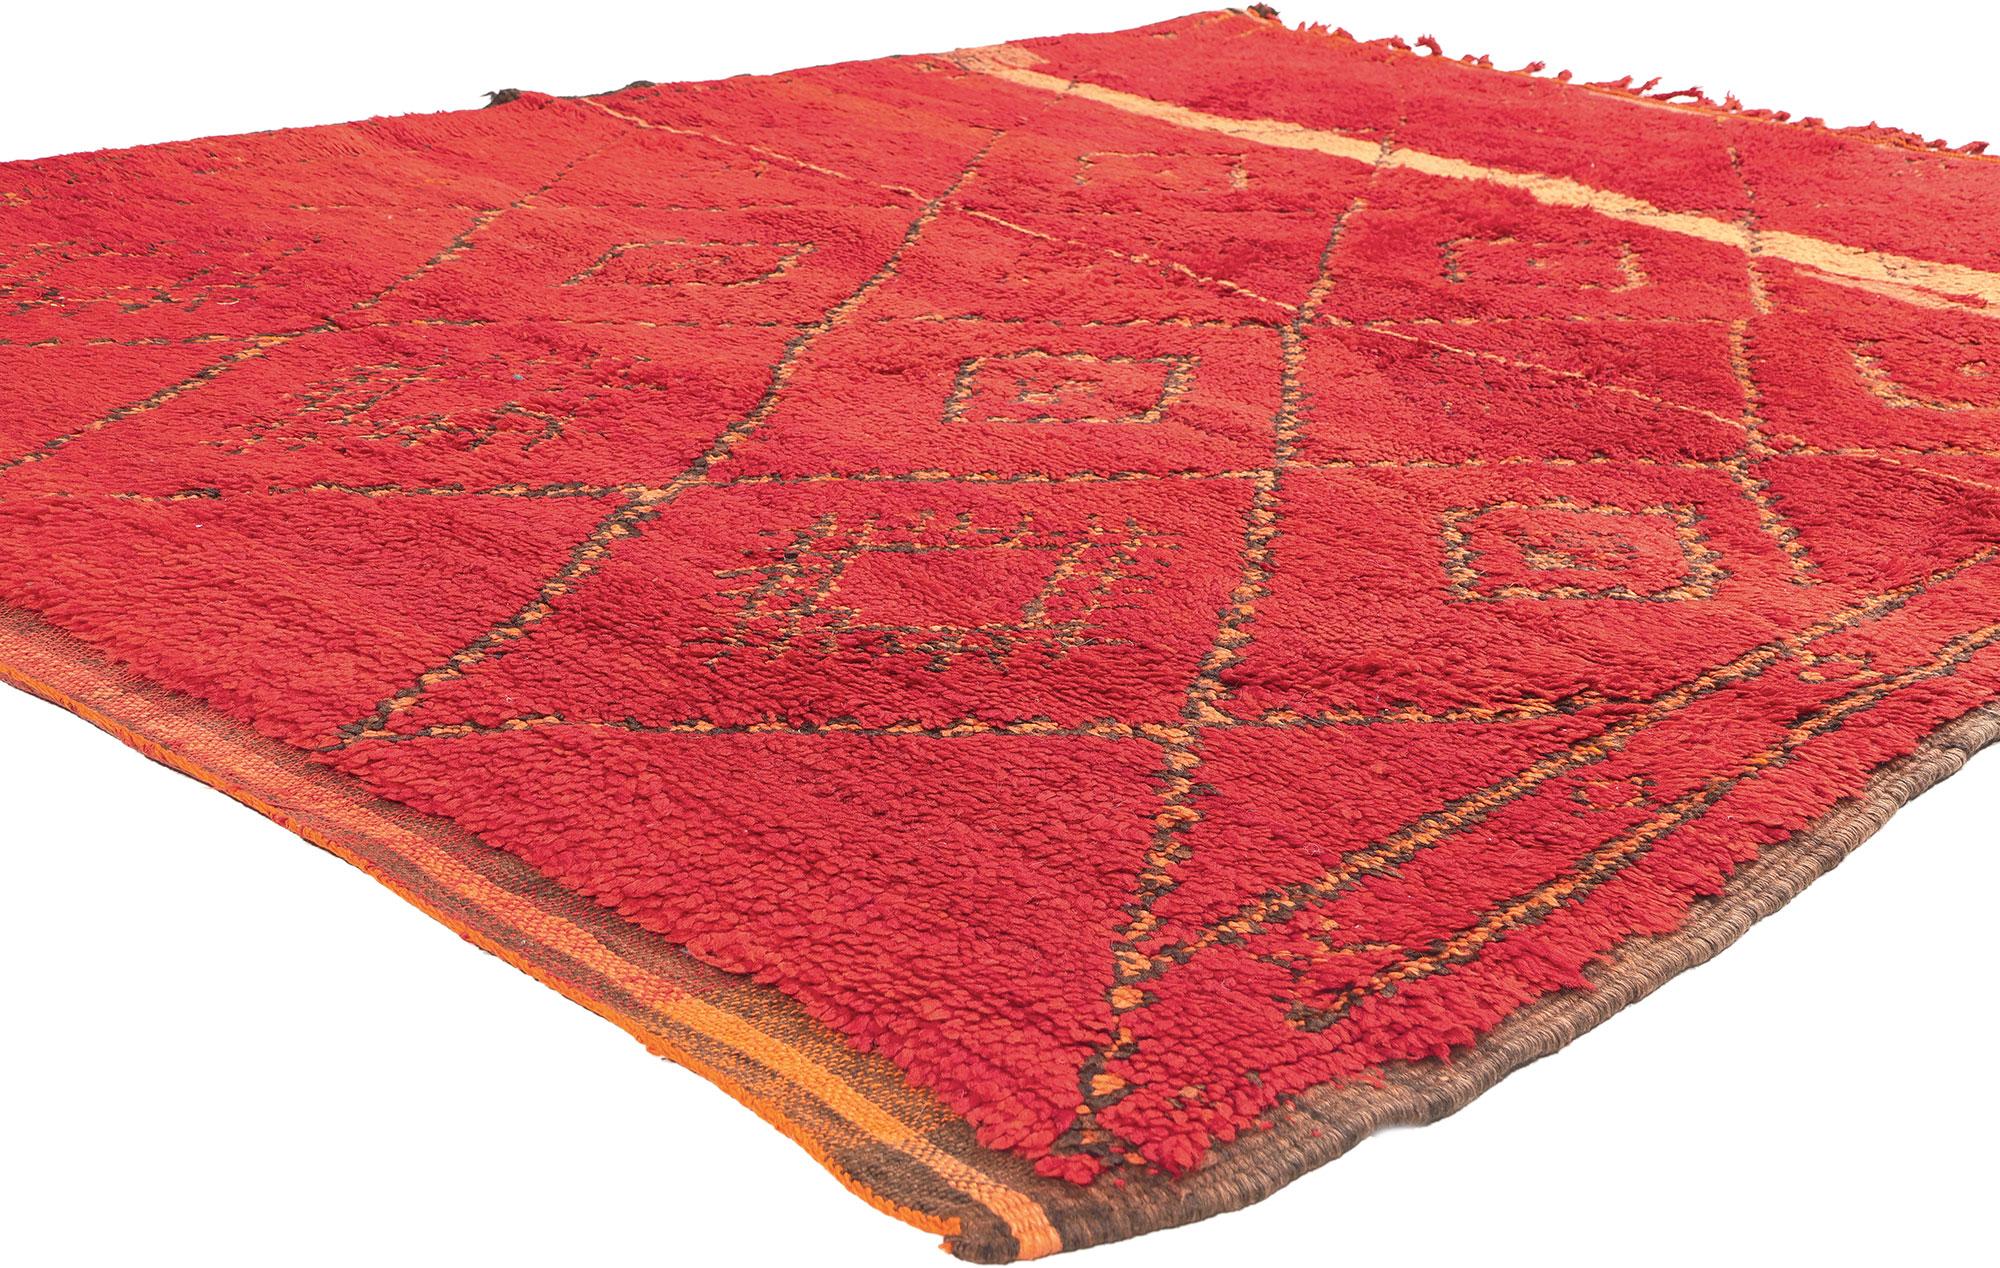 20890 Vintage Red Beni MGuild Moroccan Rug, 05'09 x 07'08. This vintage Beni MGuild rug is a traditional handwoven Moroccan masterpiece crafted by the Beni MGuild tribe, a subset of the Berber ethnic community in Morocco. Known for their intricate